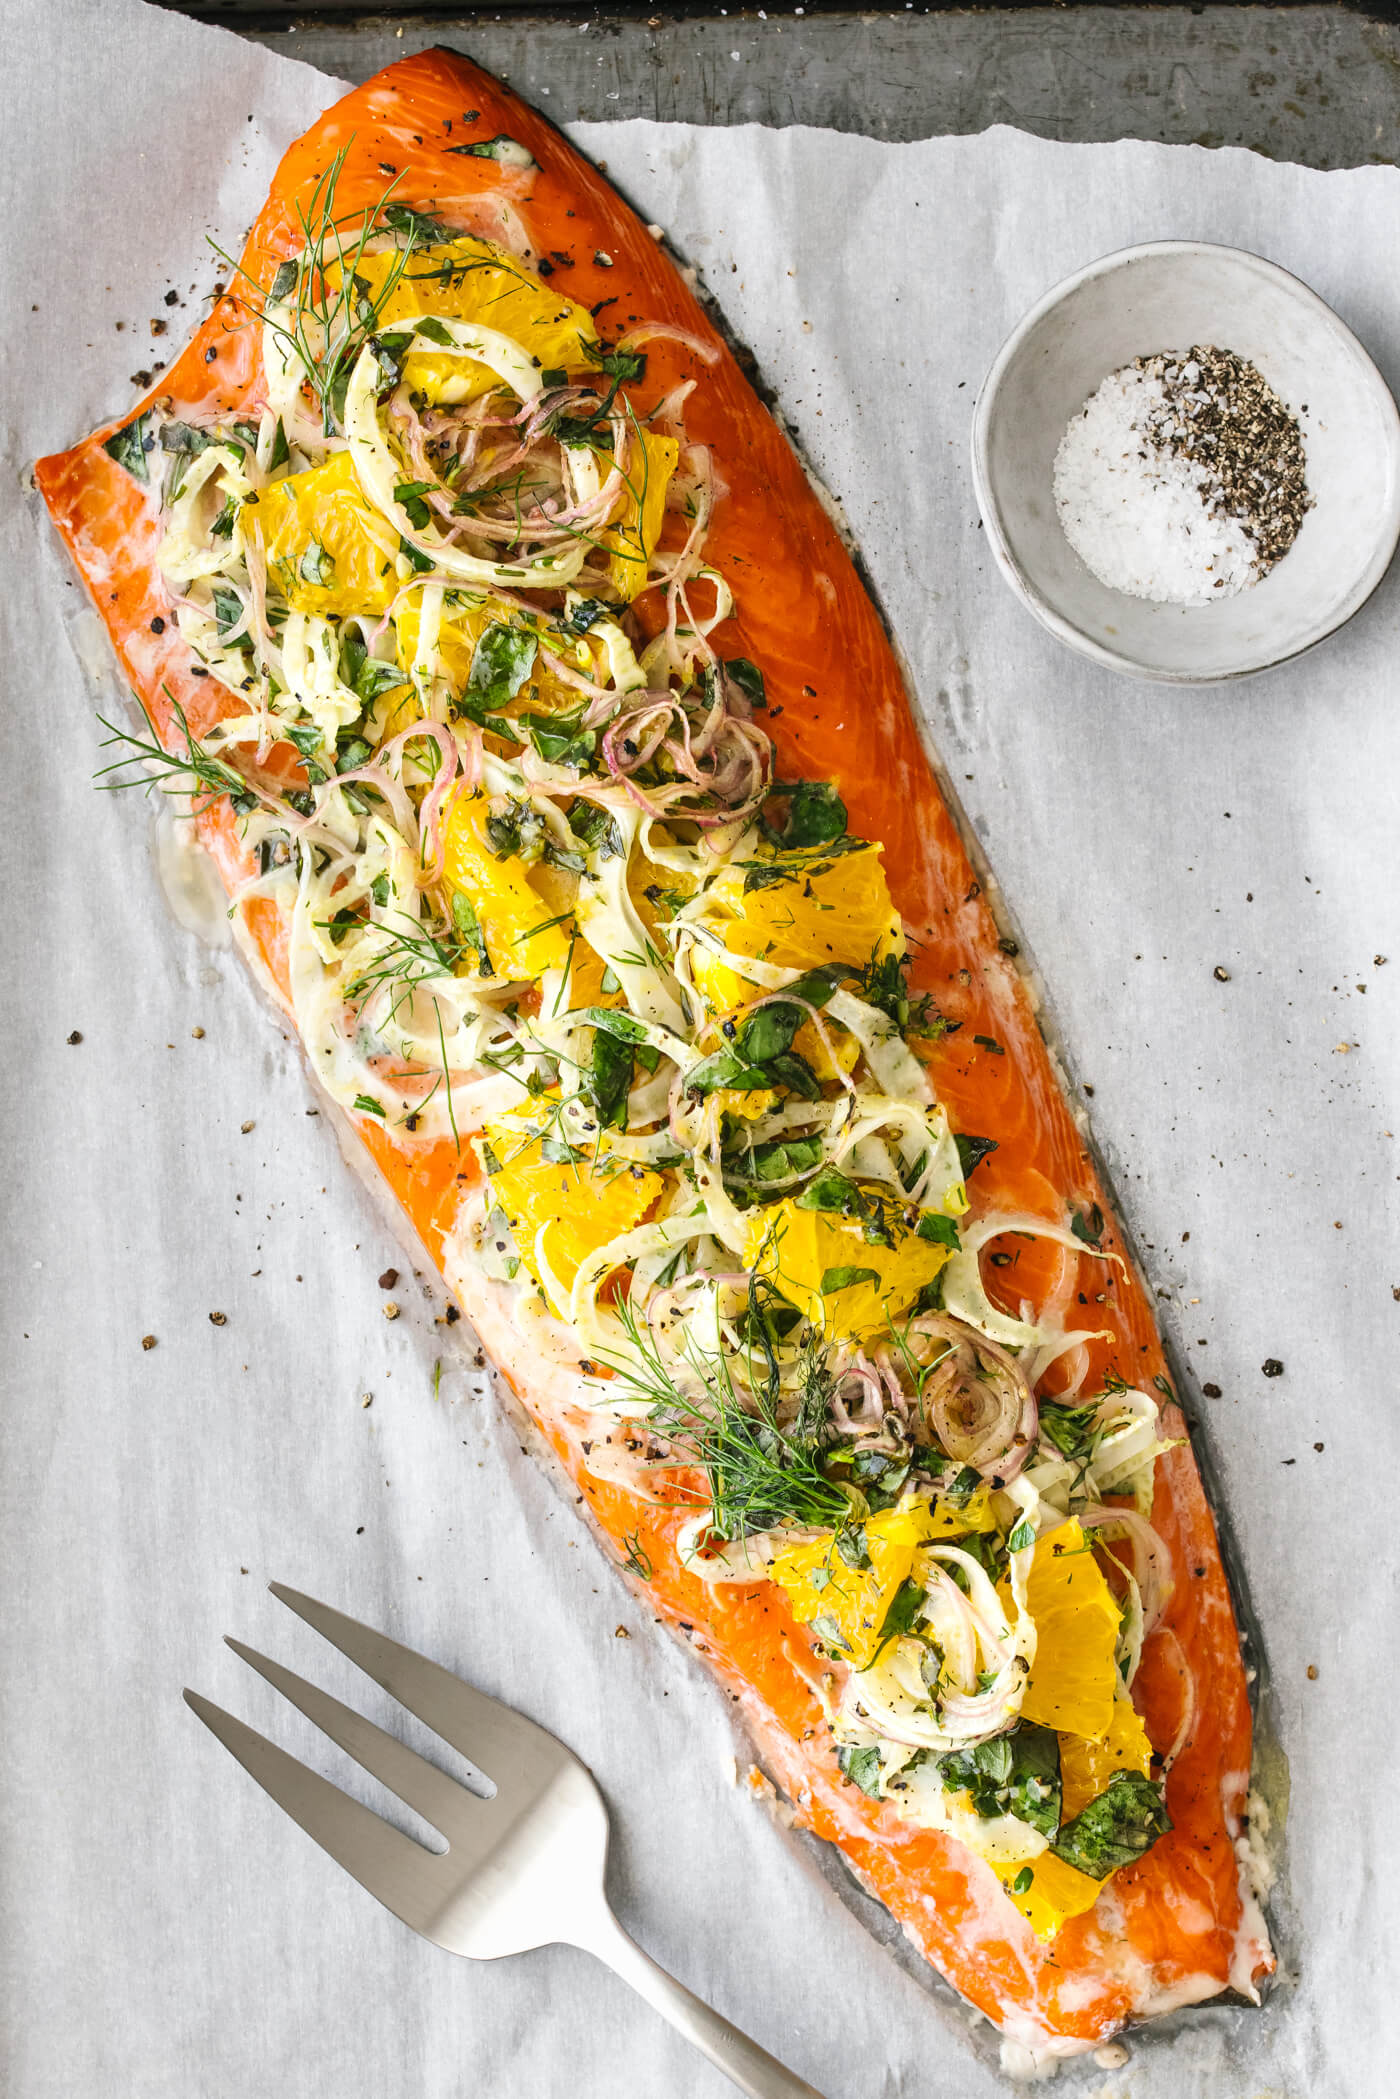 Slow roasted salmon with orange, fennel, and herbs on a sheet pan.